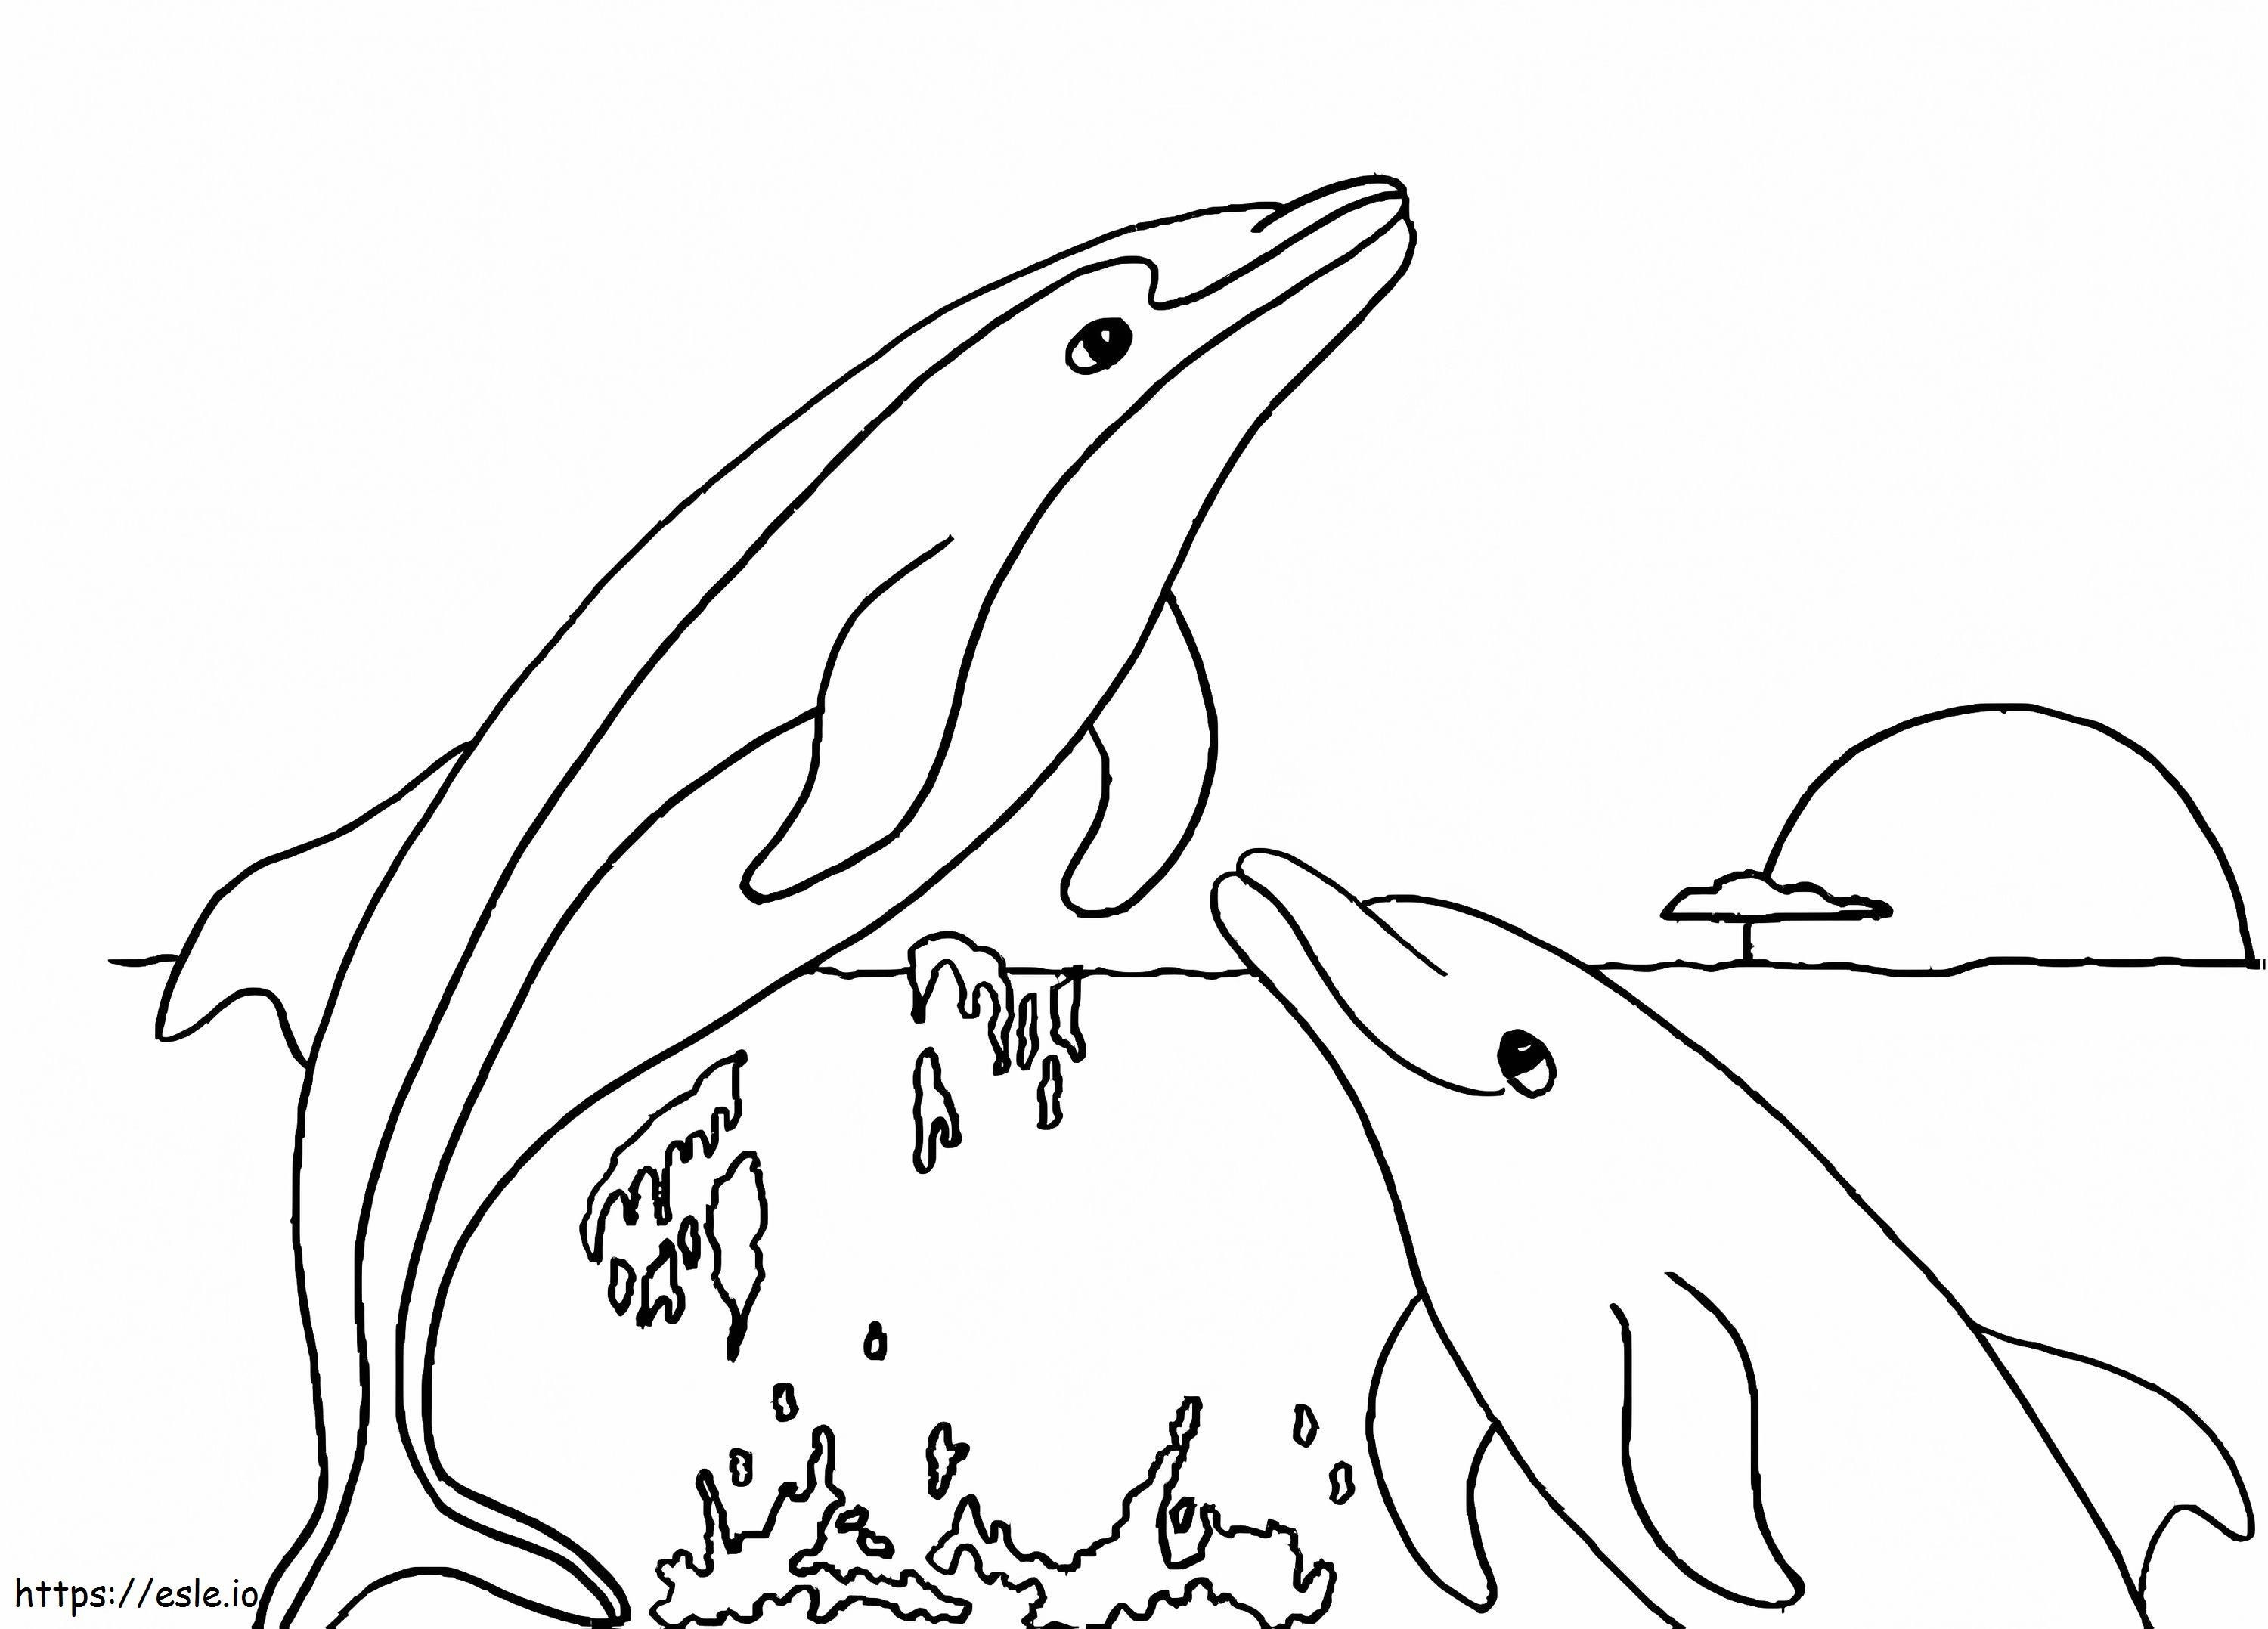 Printable Dolphins coloring page